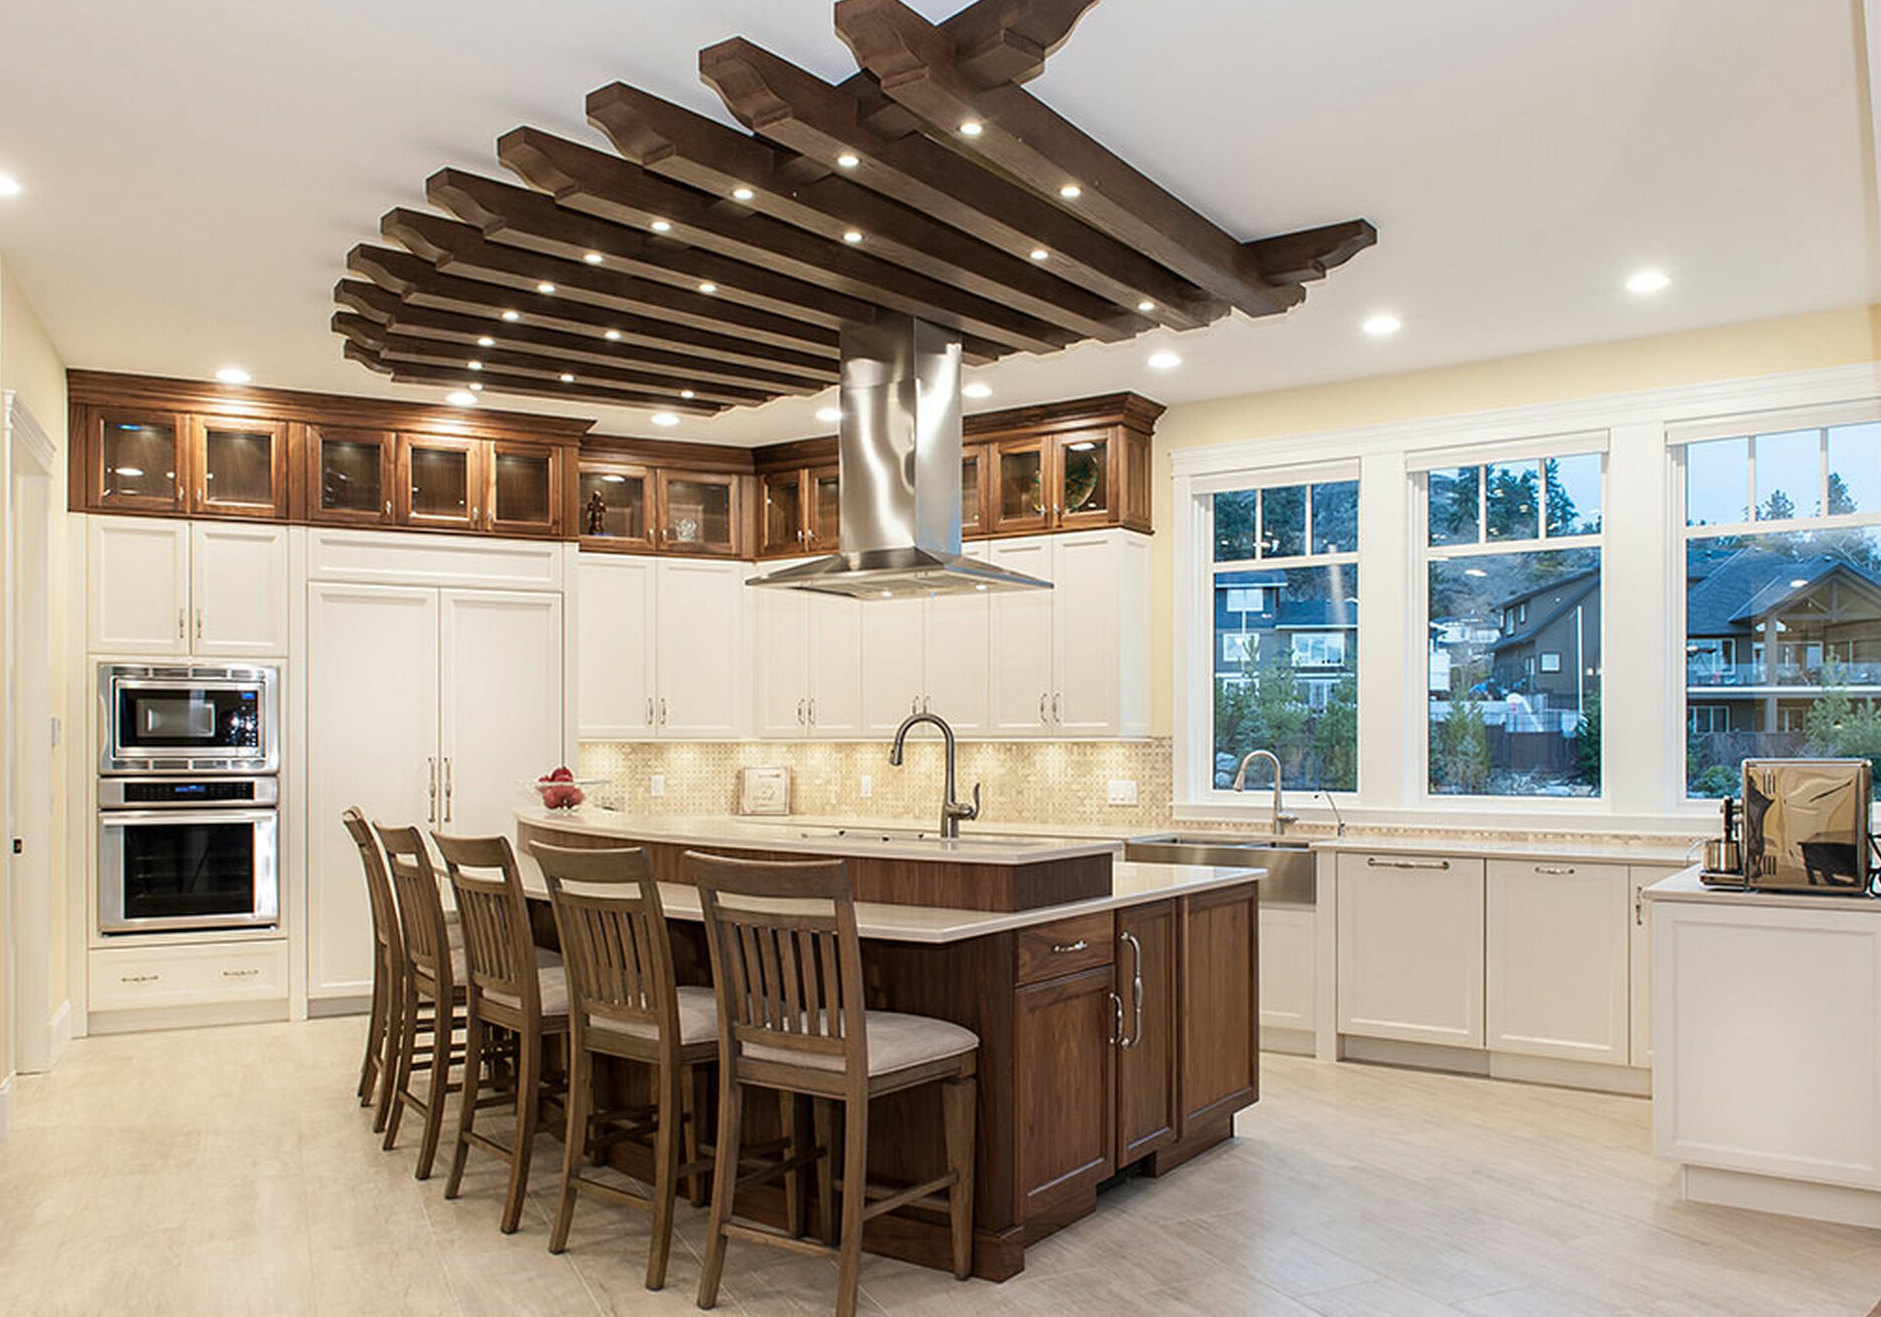 Faux wood ceiling beams with LED recessed lights above a kitchen island